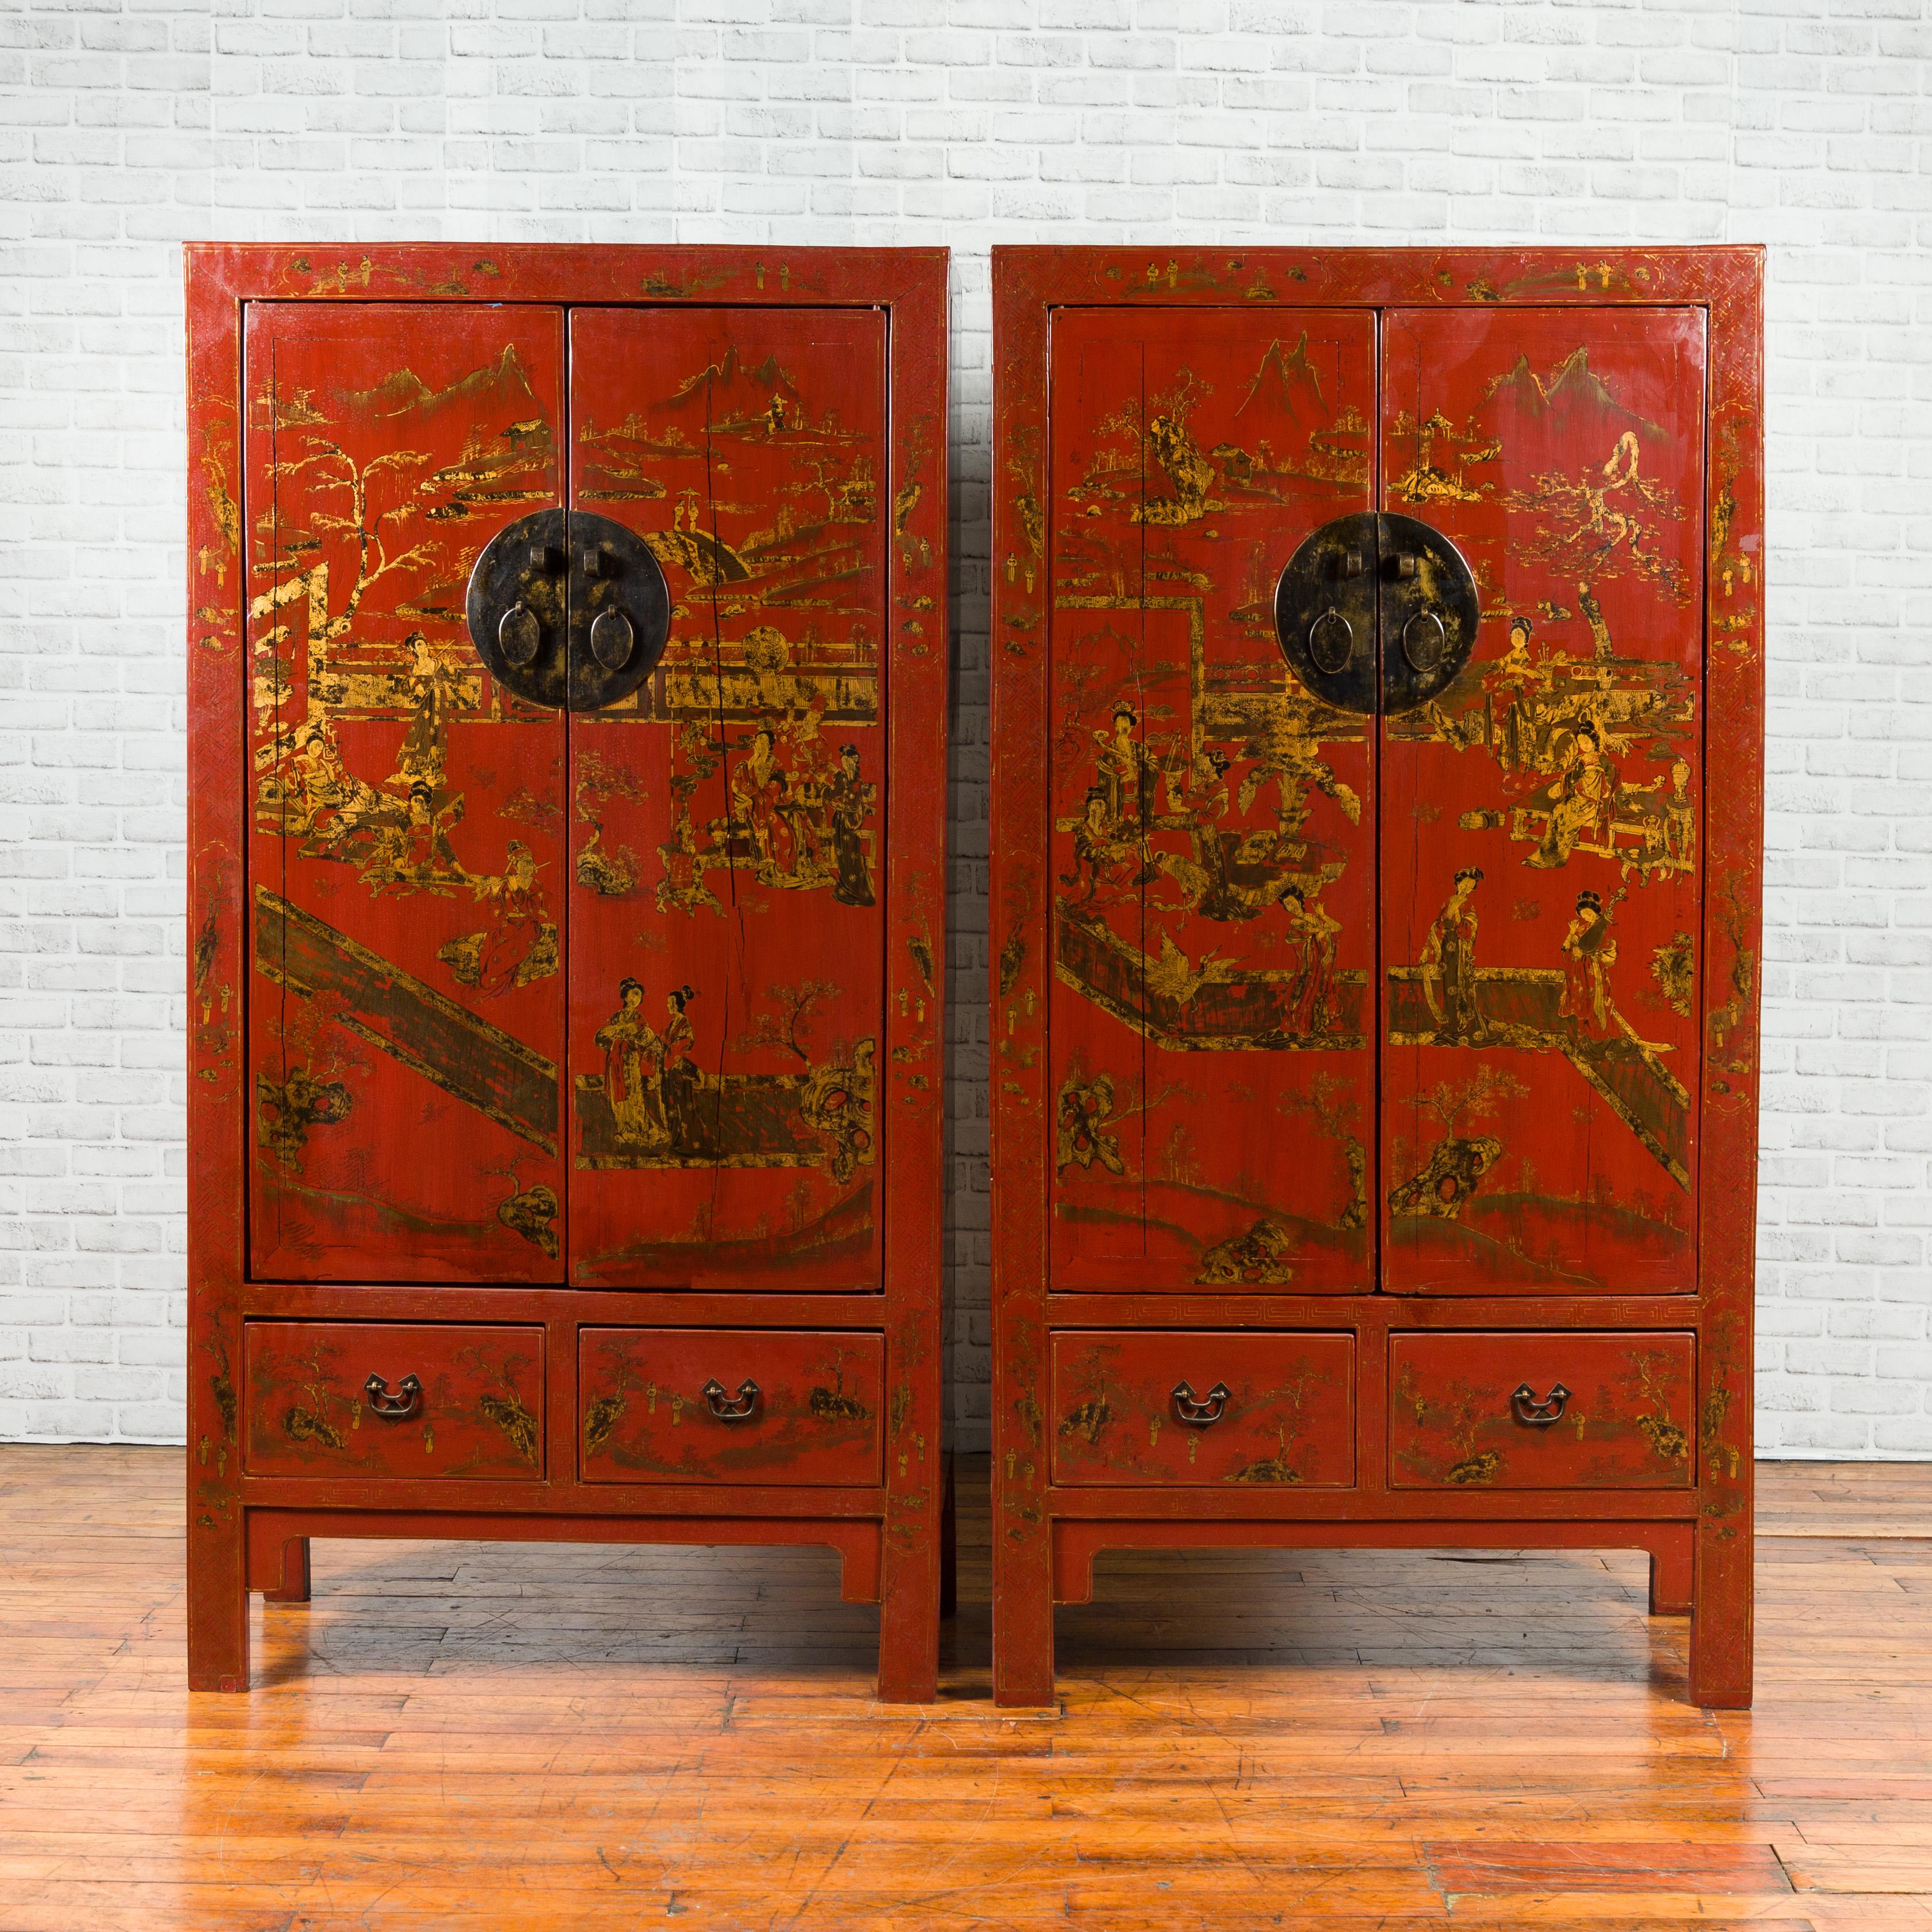 A pair of medium size Chinese Qing dynasty period red lacquered cabinets from the 19th century, with gilt chinoiserie décor and hidden drawers. Born in China during the Qing dynasty, each of this pair of cabinets features two doors, adorned with